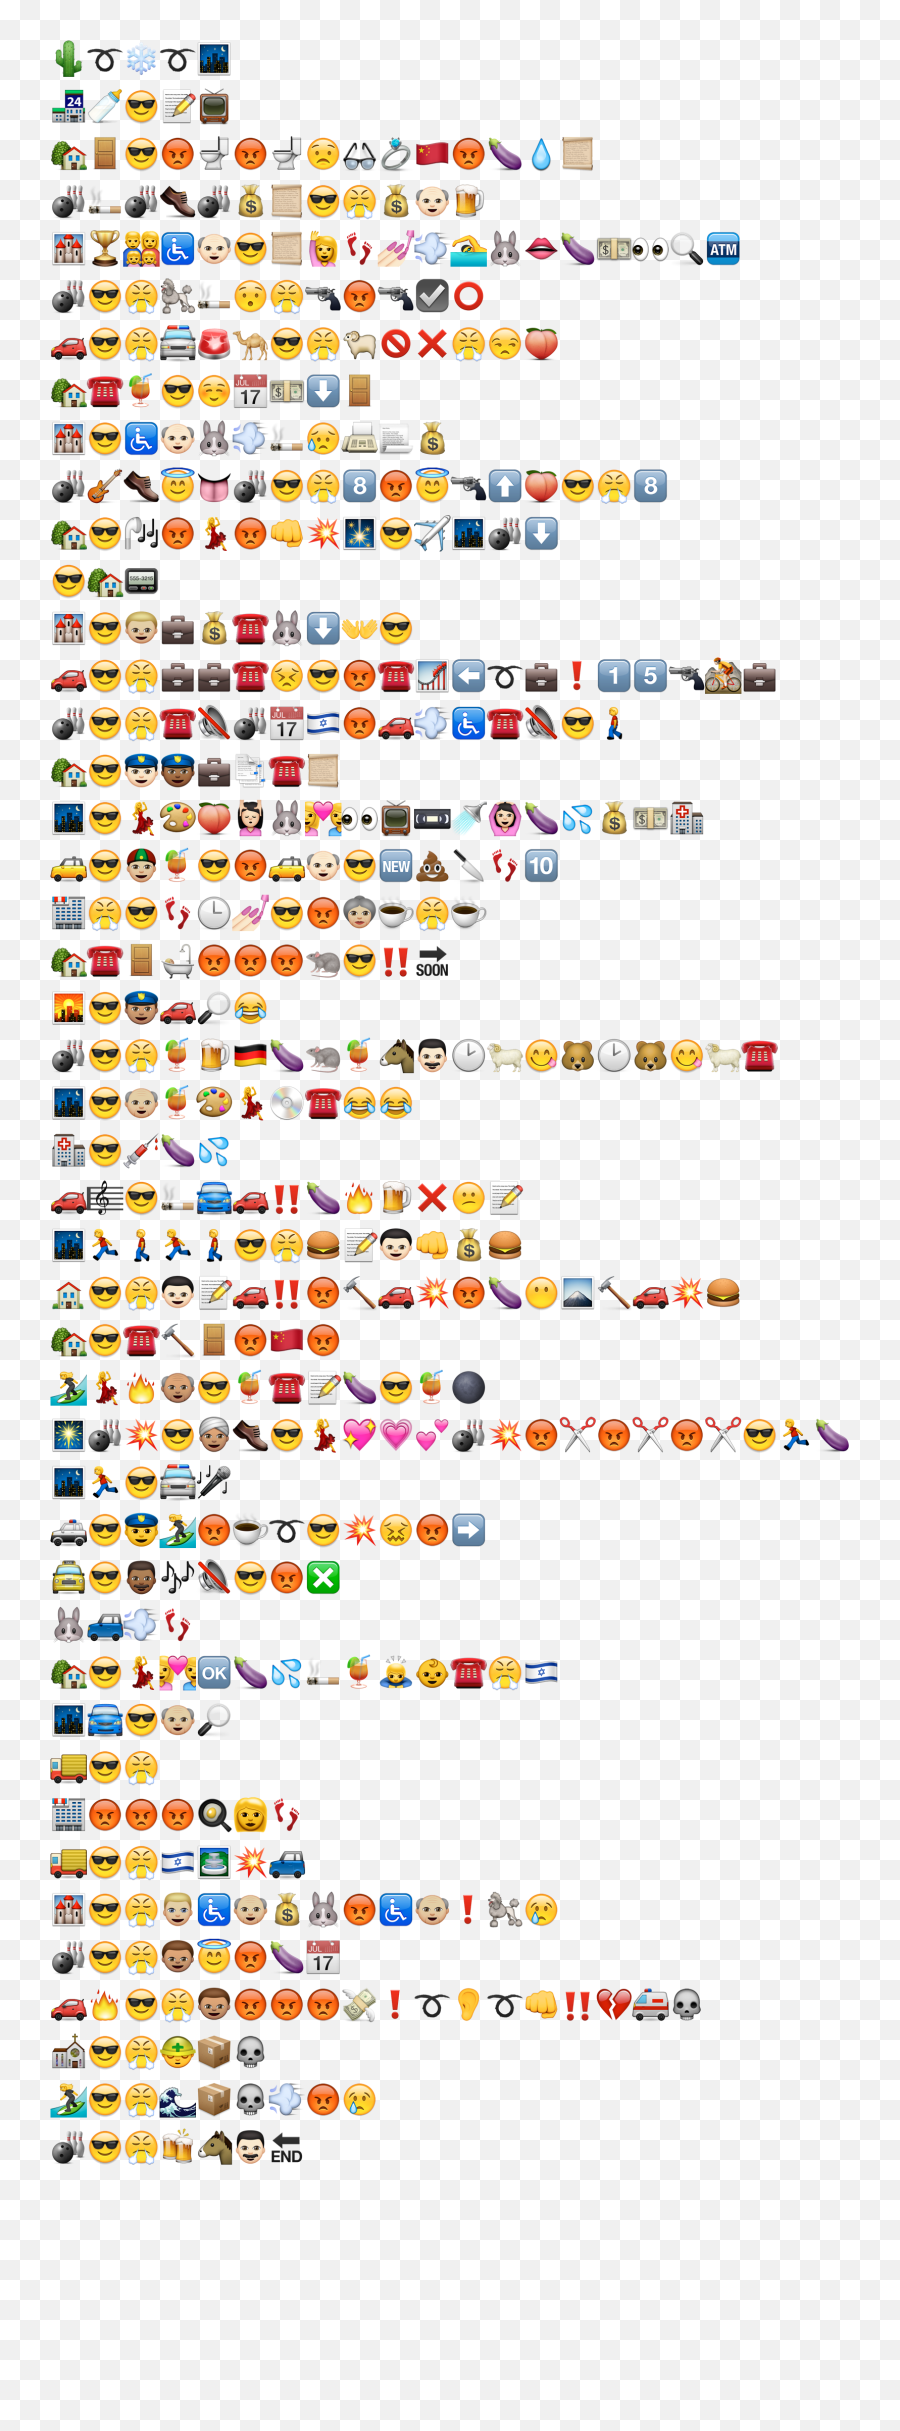 Which Stoner Classic Are These Emojis - Dot,Classic Emojis